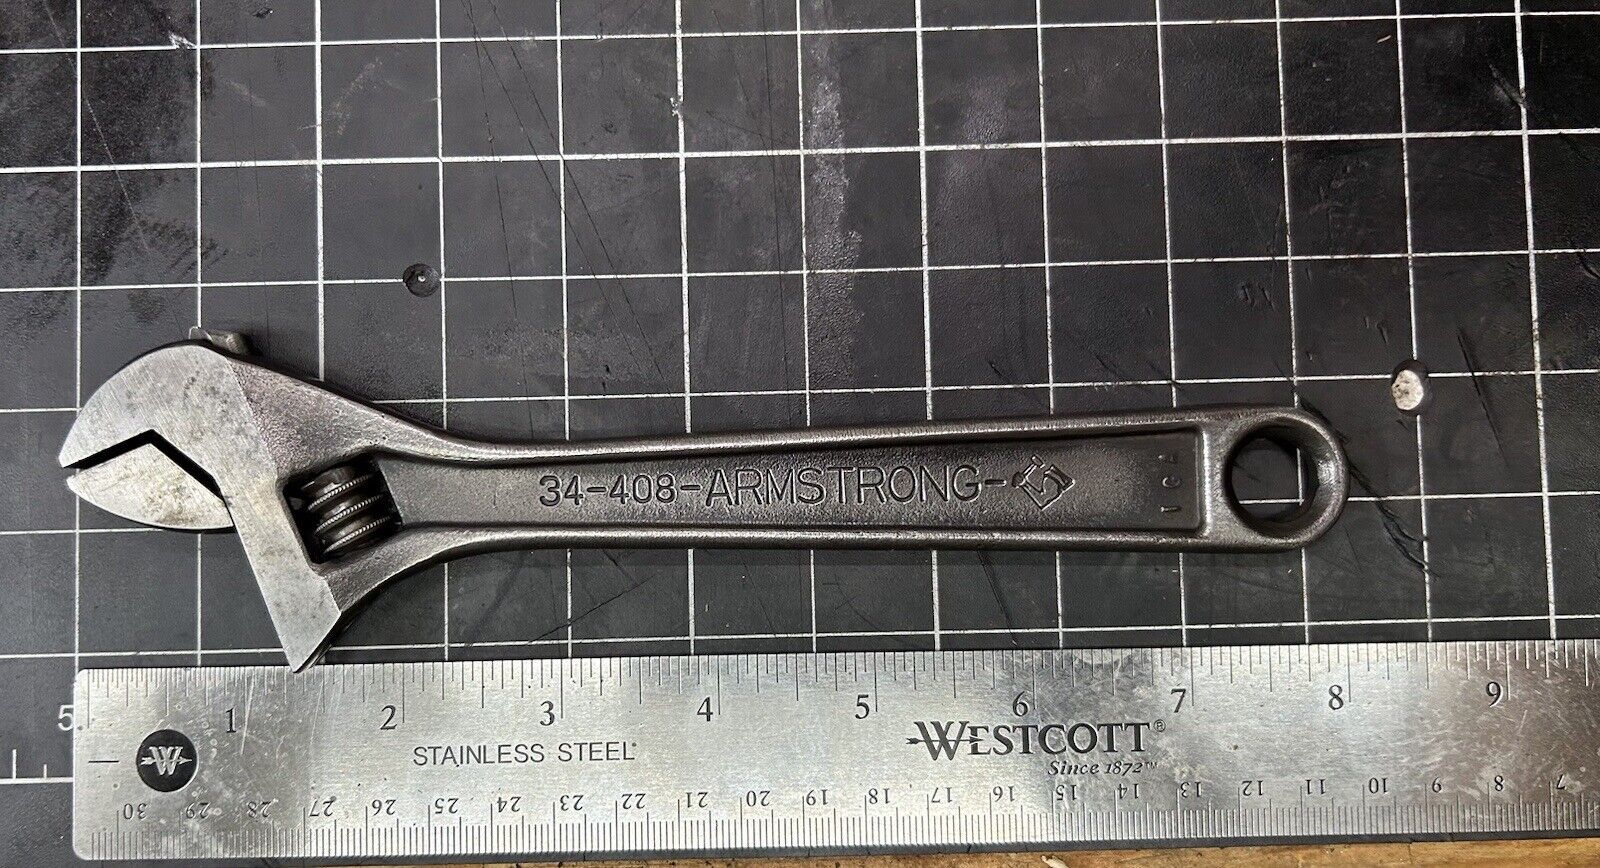 VINTAGE/ANTIQUE - ARMSTRONG 34-408 ADJUSTABLE WRENCH MADE IN USA